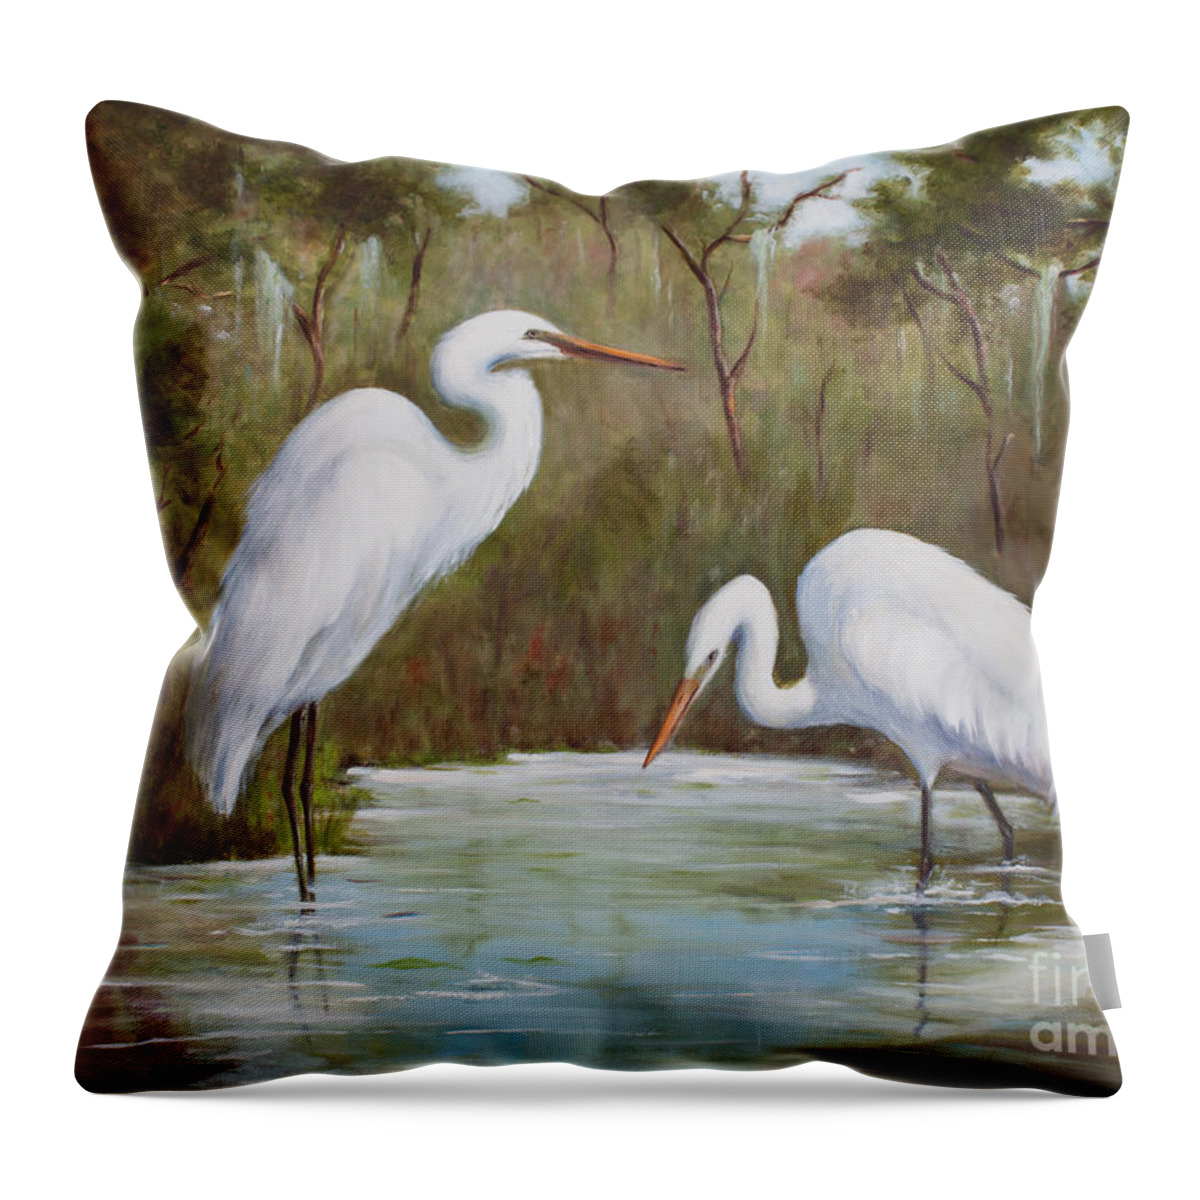 Egrets Throw Pillow featuring the painting Hunting for Prey by Glenda Cason